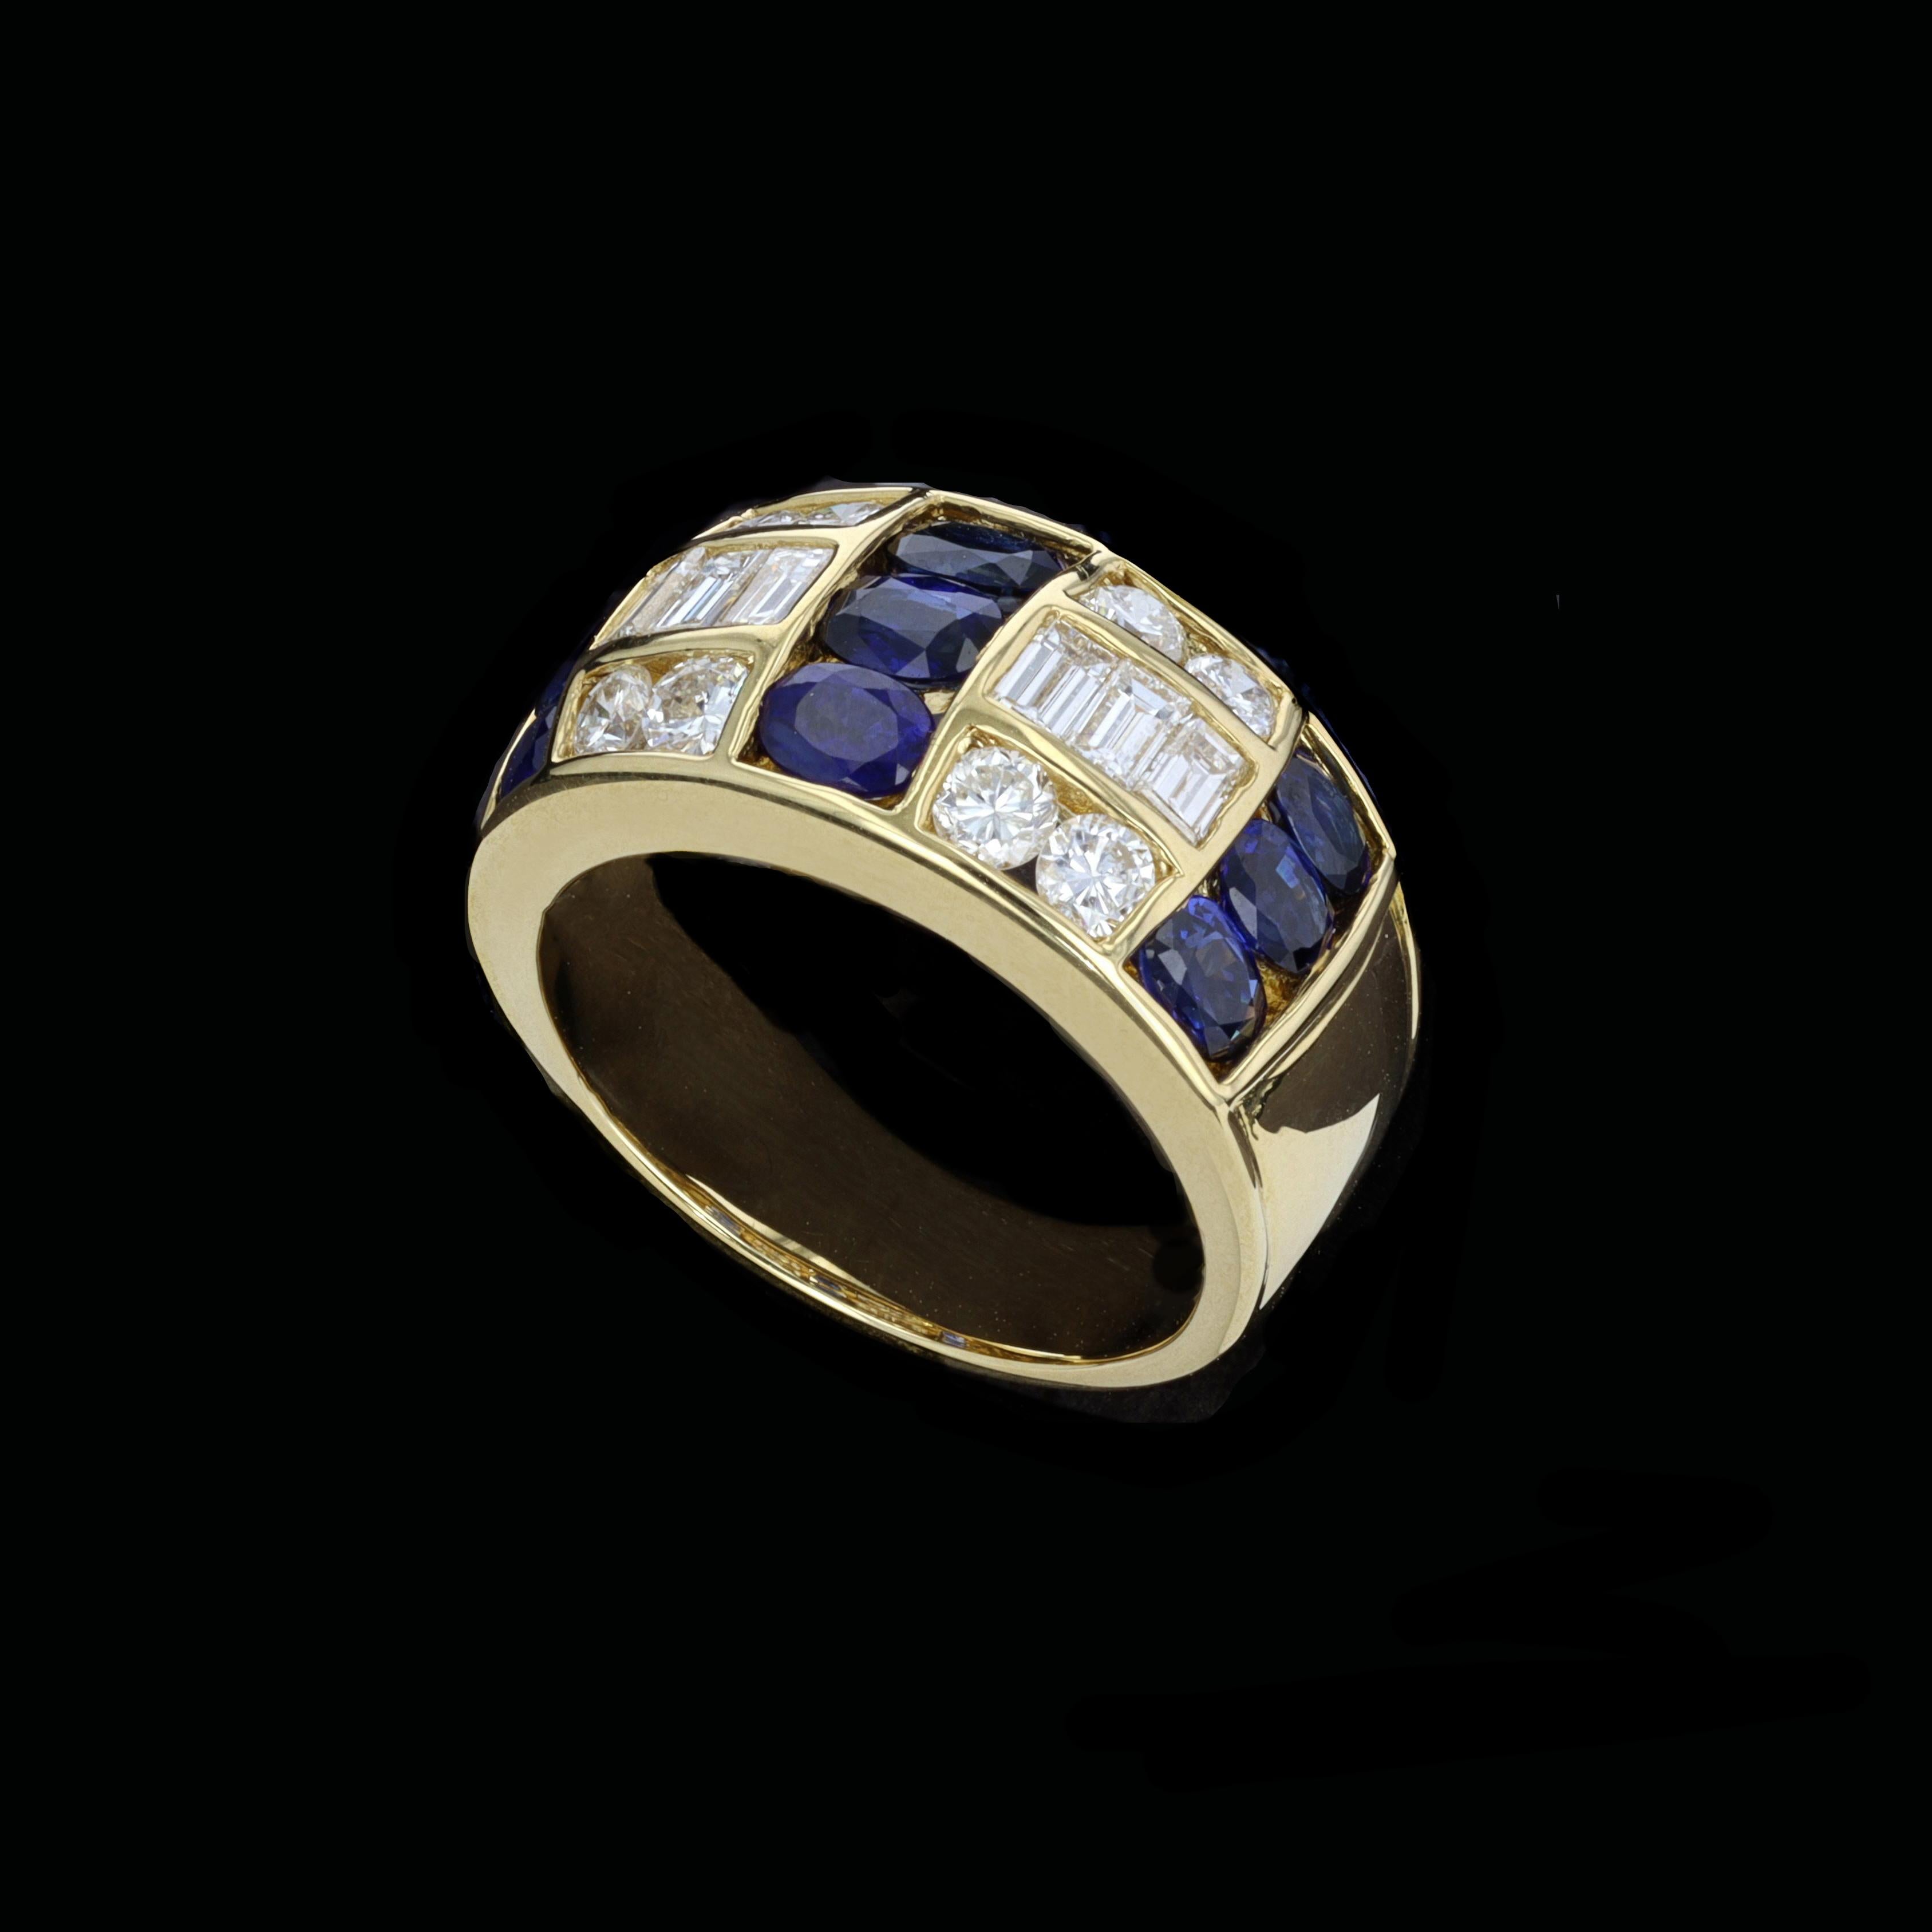 Layers of lovliness to be found in this1.15ct Diamond 1.91ct Sapphire 18k Yellow Gold Ring. The ring is set with sparkling round and emerald cut diamonds that weigh approximately 1.15ct. The color of these diamonds is F-G with VS clarity. The